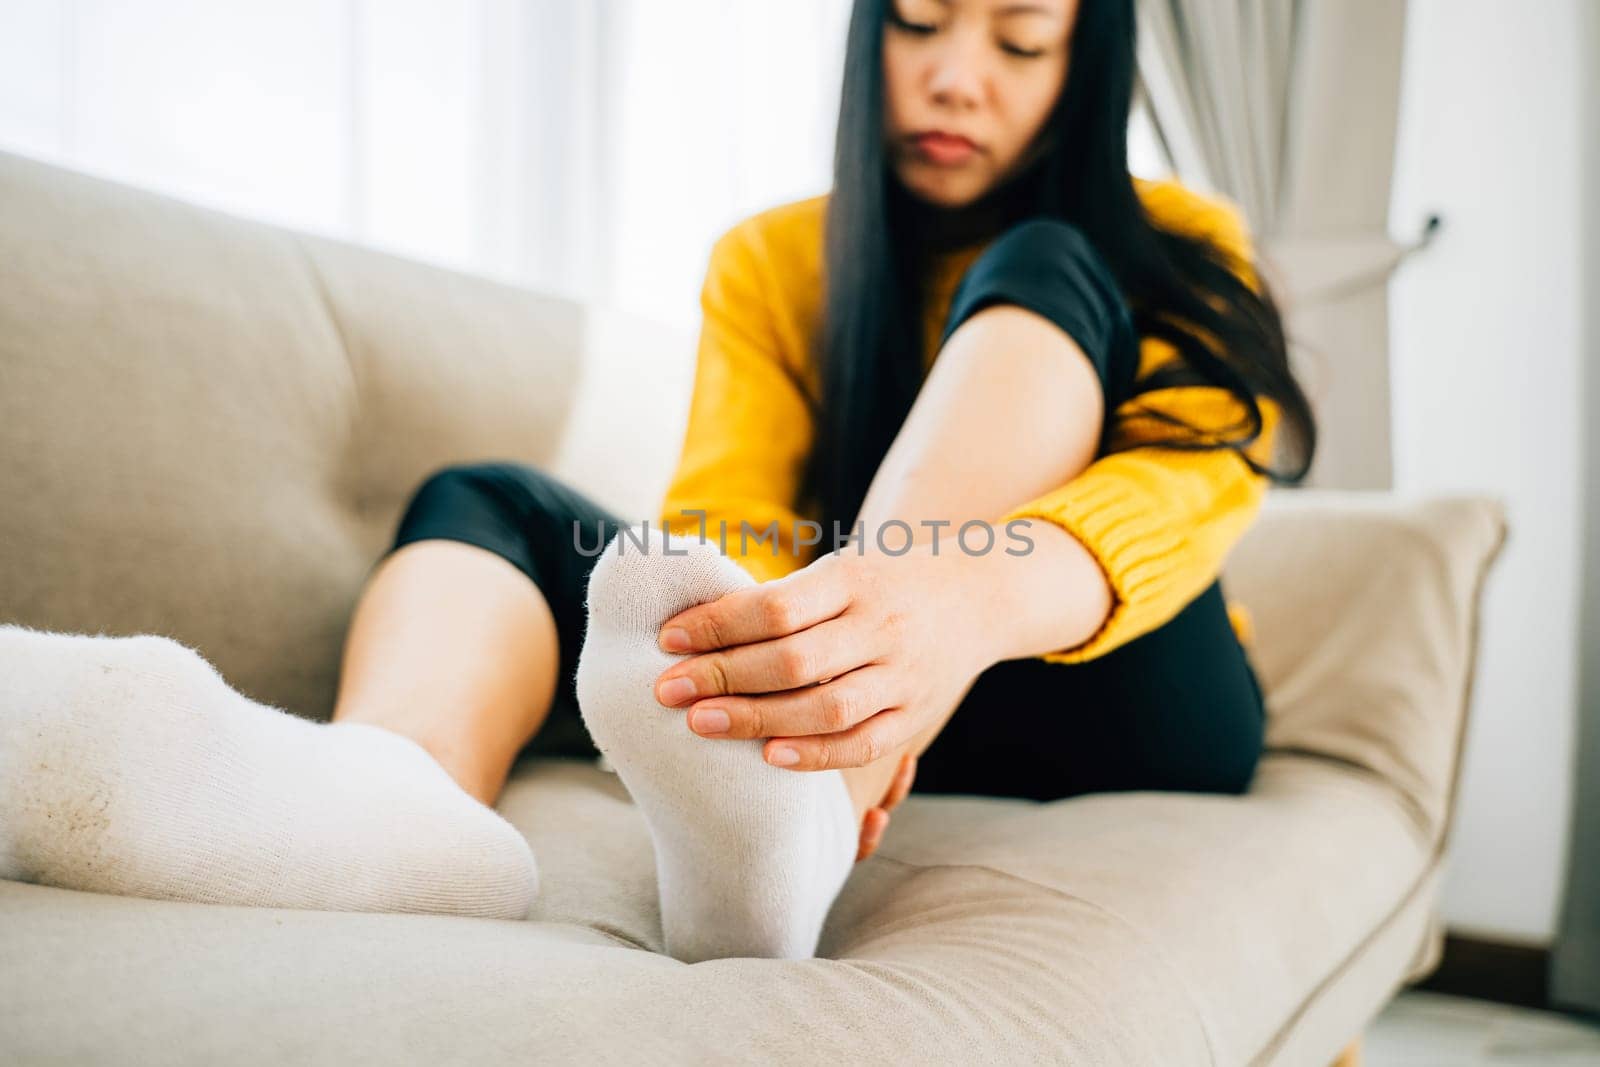 A woman on a sofa massages her painful foot emphasizing the highlighted pain area by Sorapop